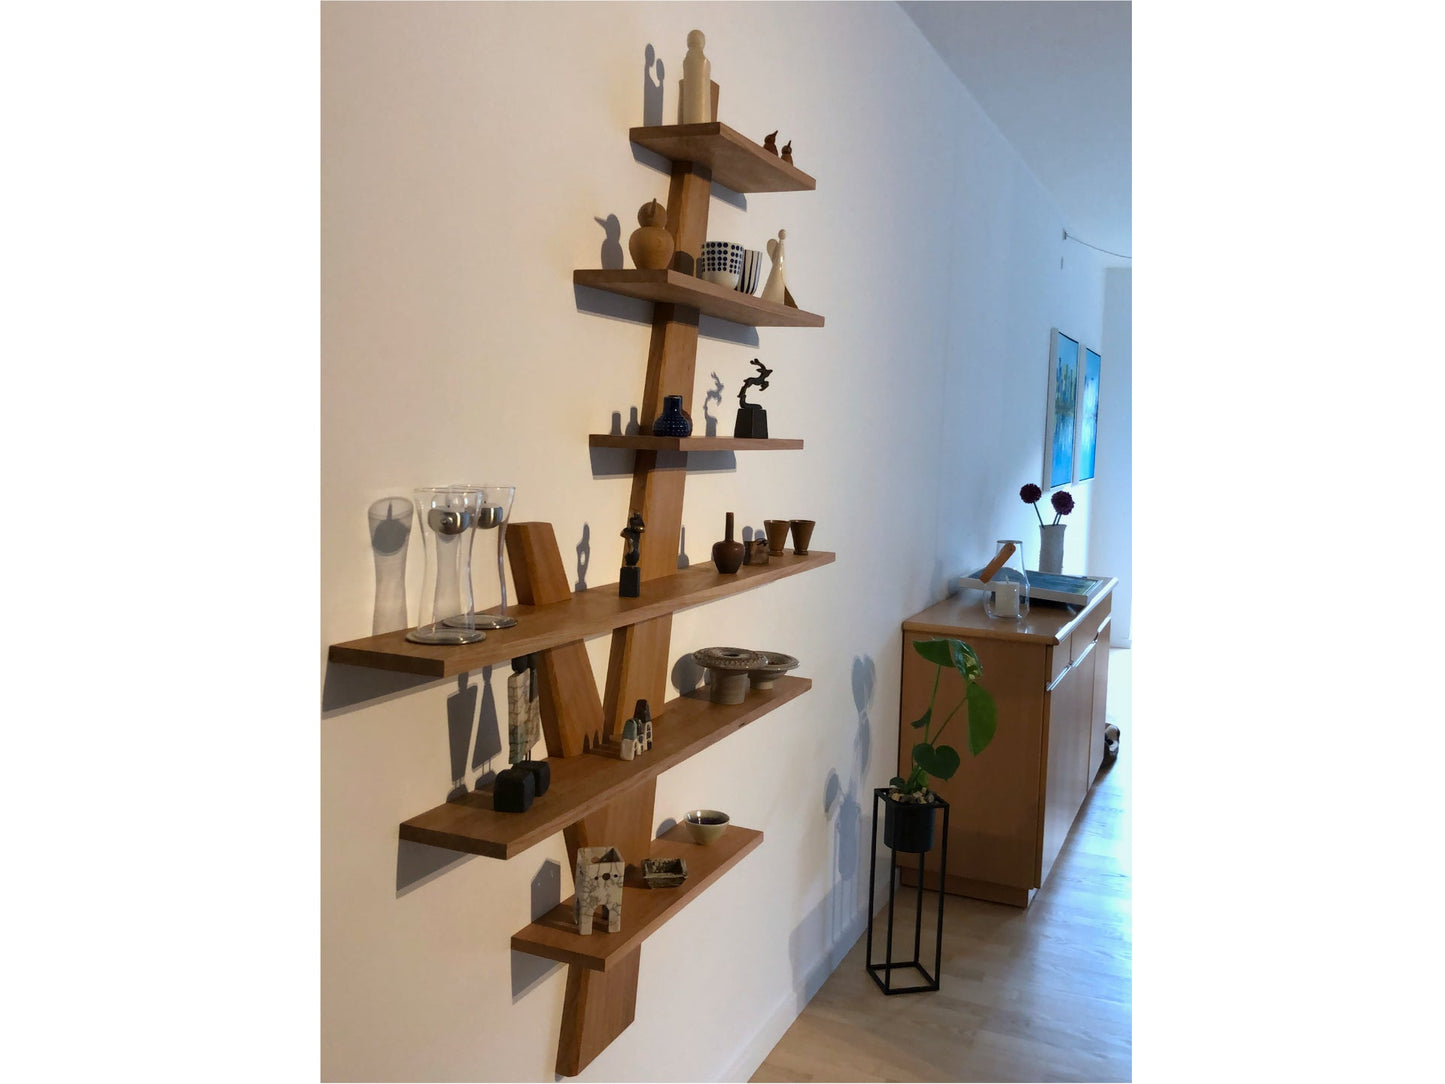 The tree of shelves